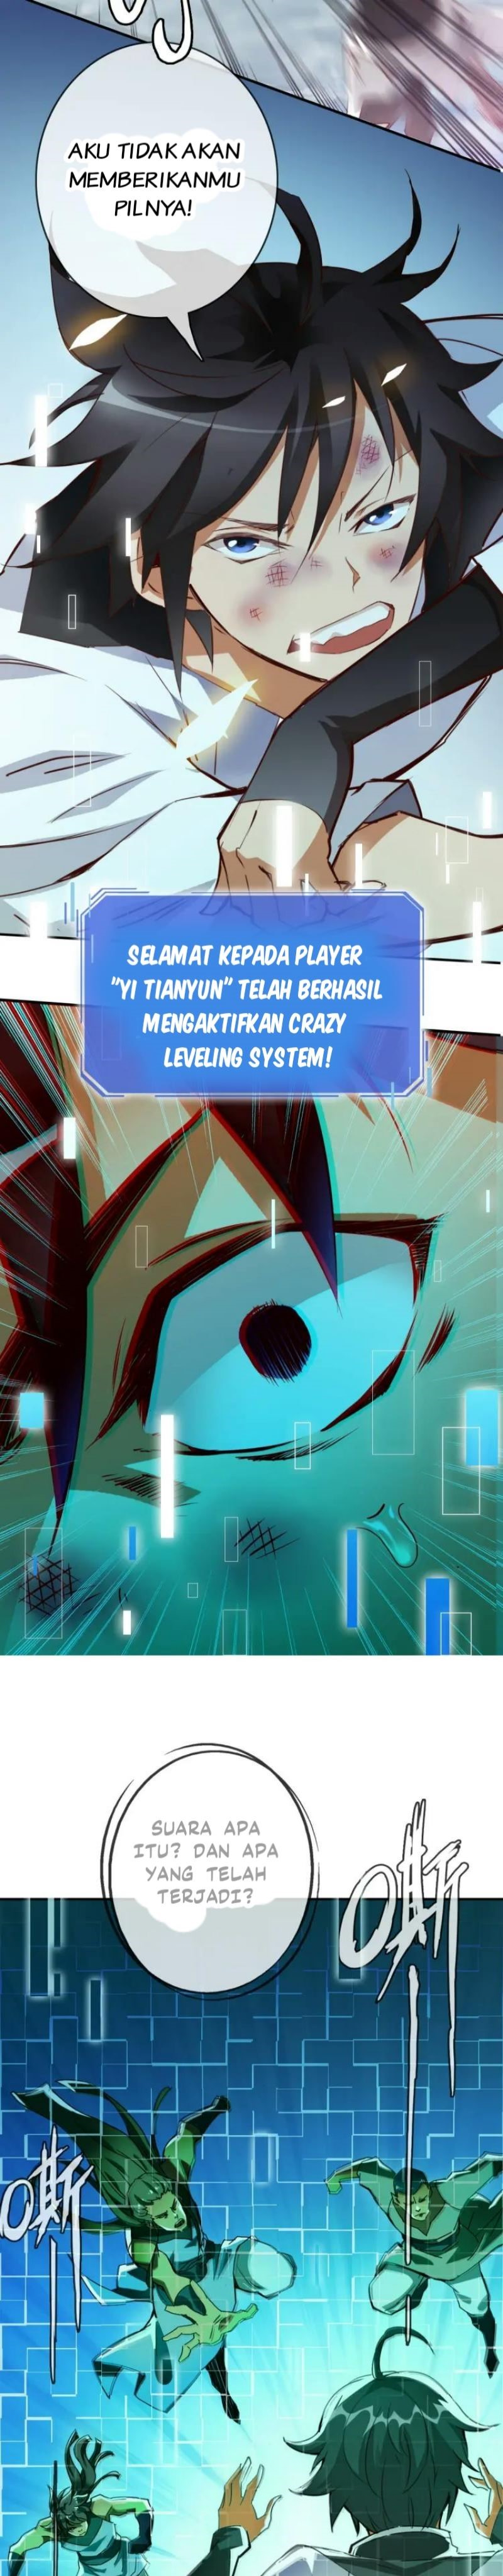 Crazy Leveling System Chapter 01 30